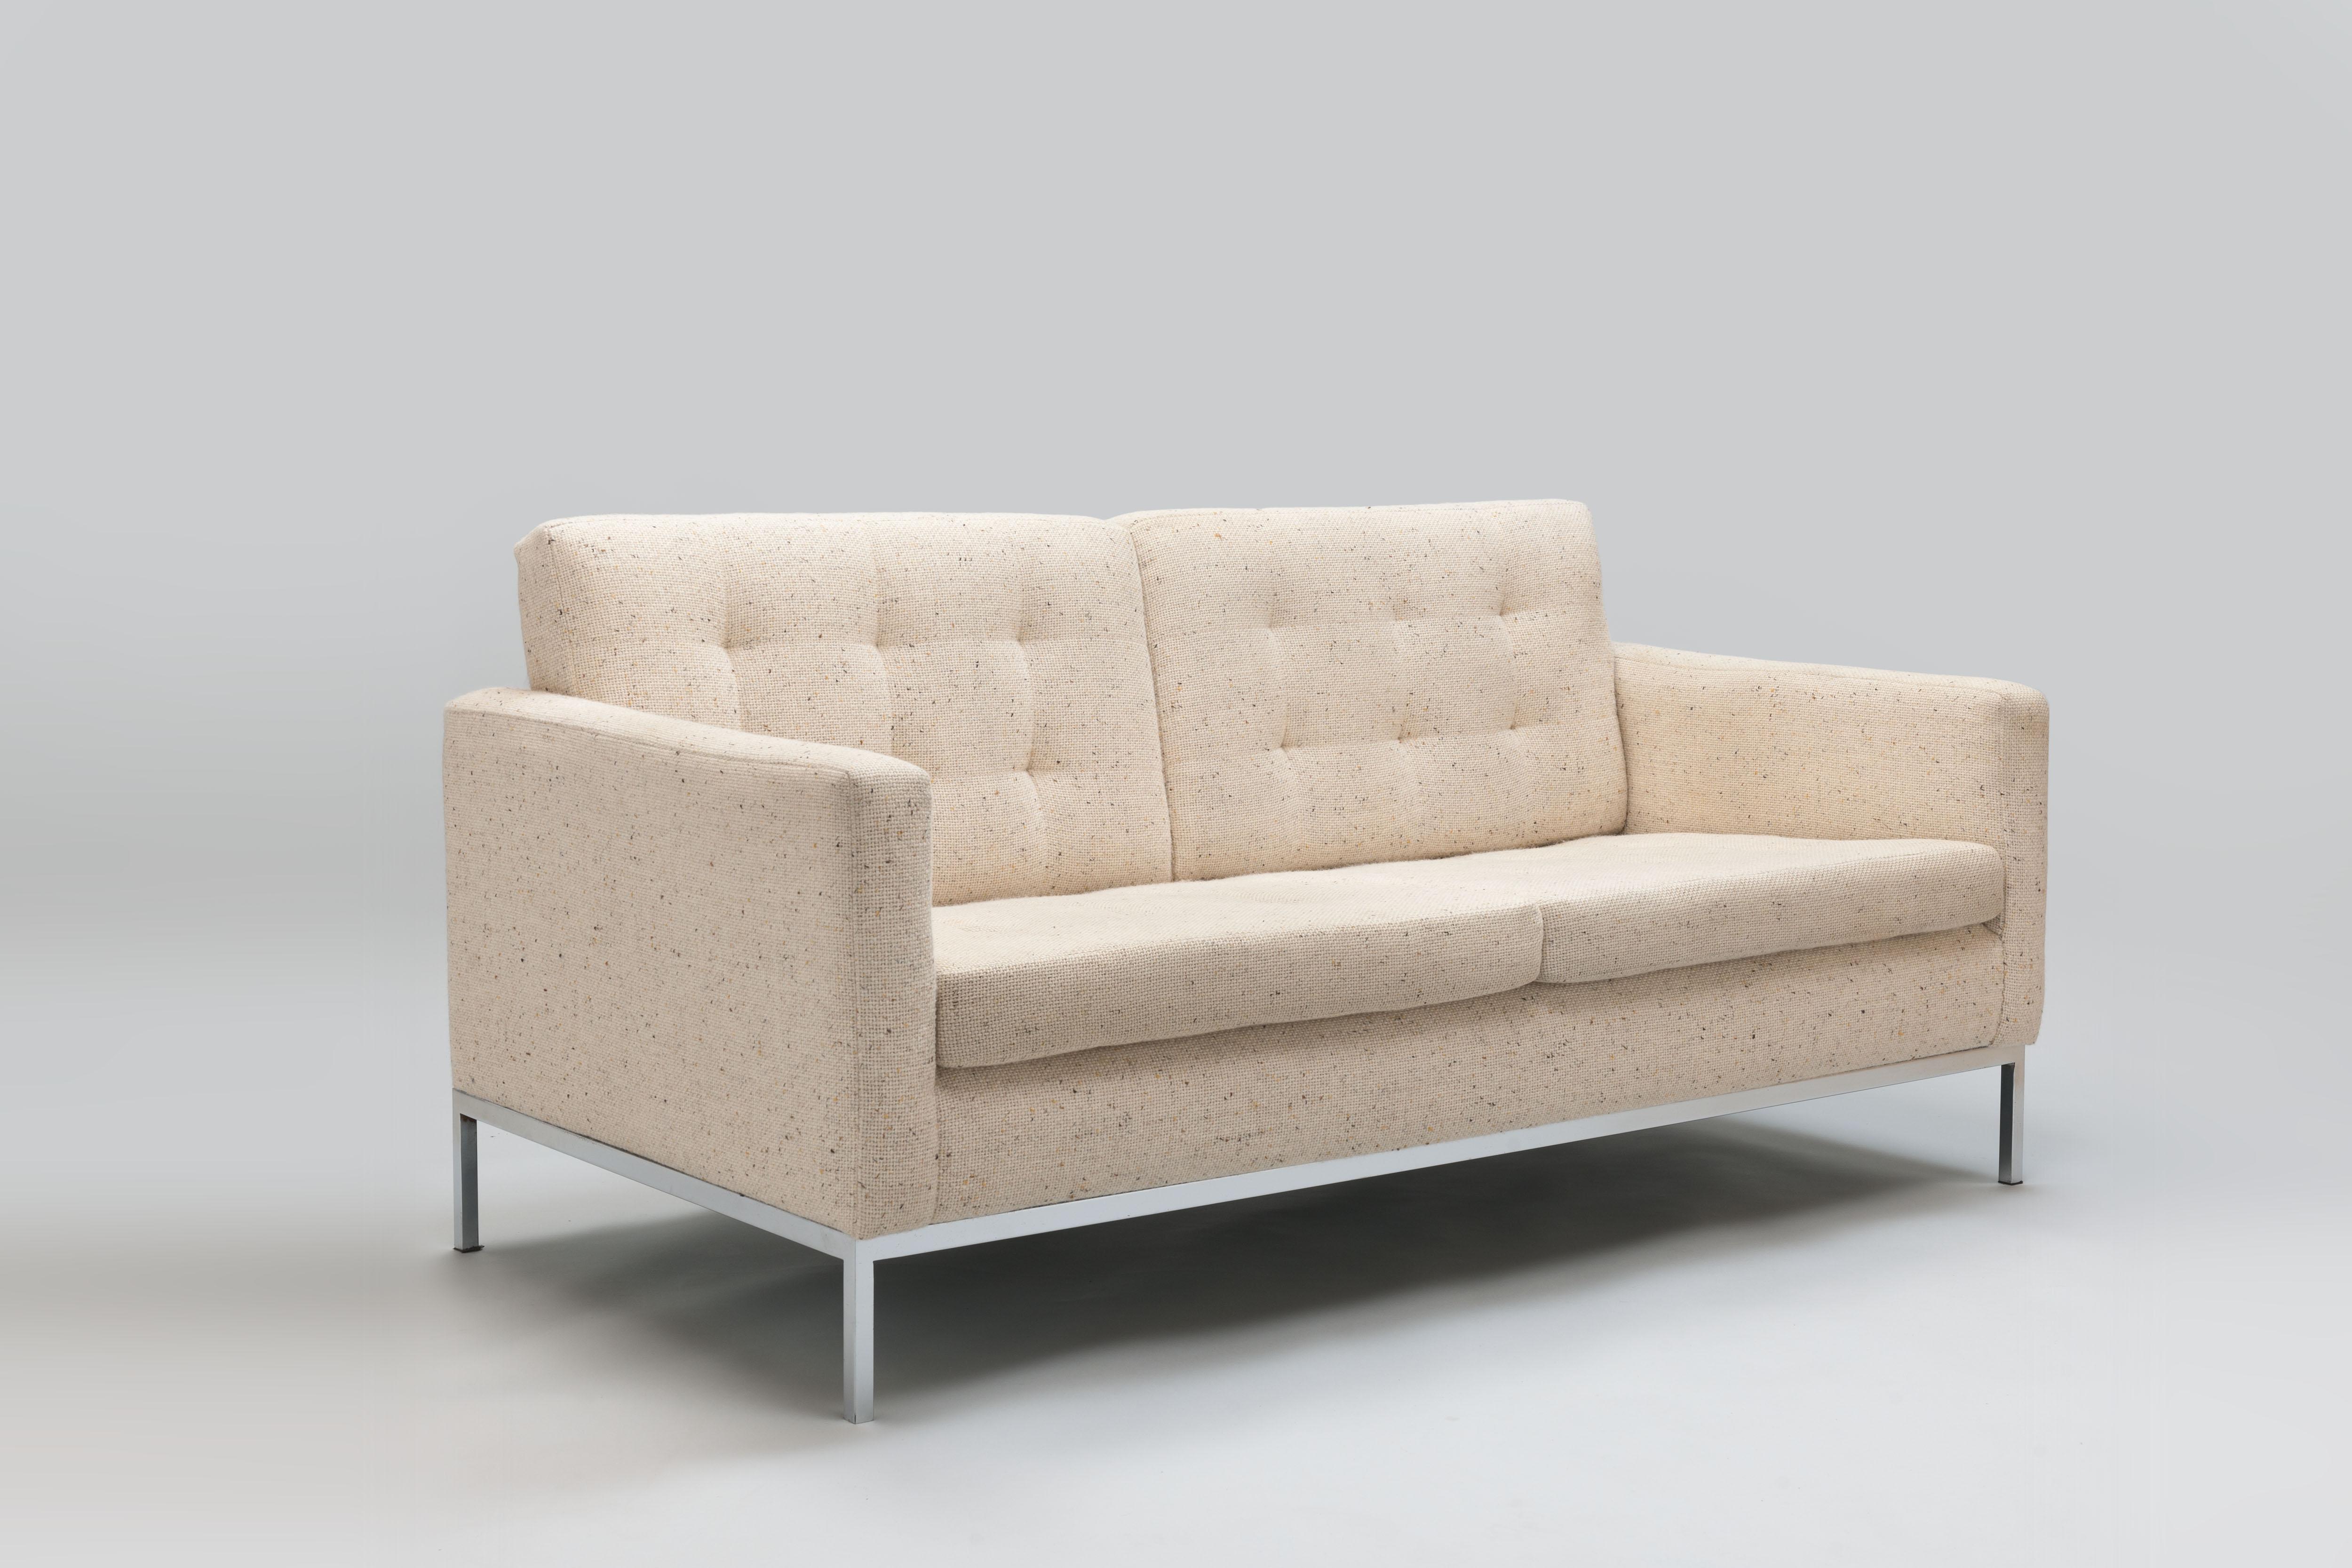 Vintage Florence Knoll 2 seater 'lounge series' sofa with original 2nd generation upholstery in a coarse woven off-white mottled wool fabric. 
This sofa dates from the first series productions, recognisable by the seamless frame. 

The model sofa